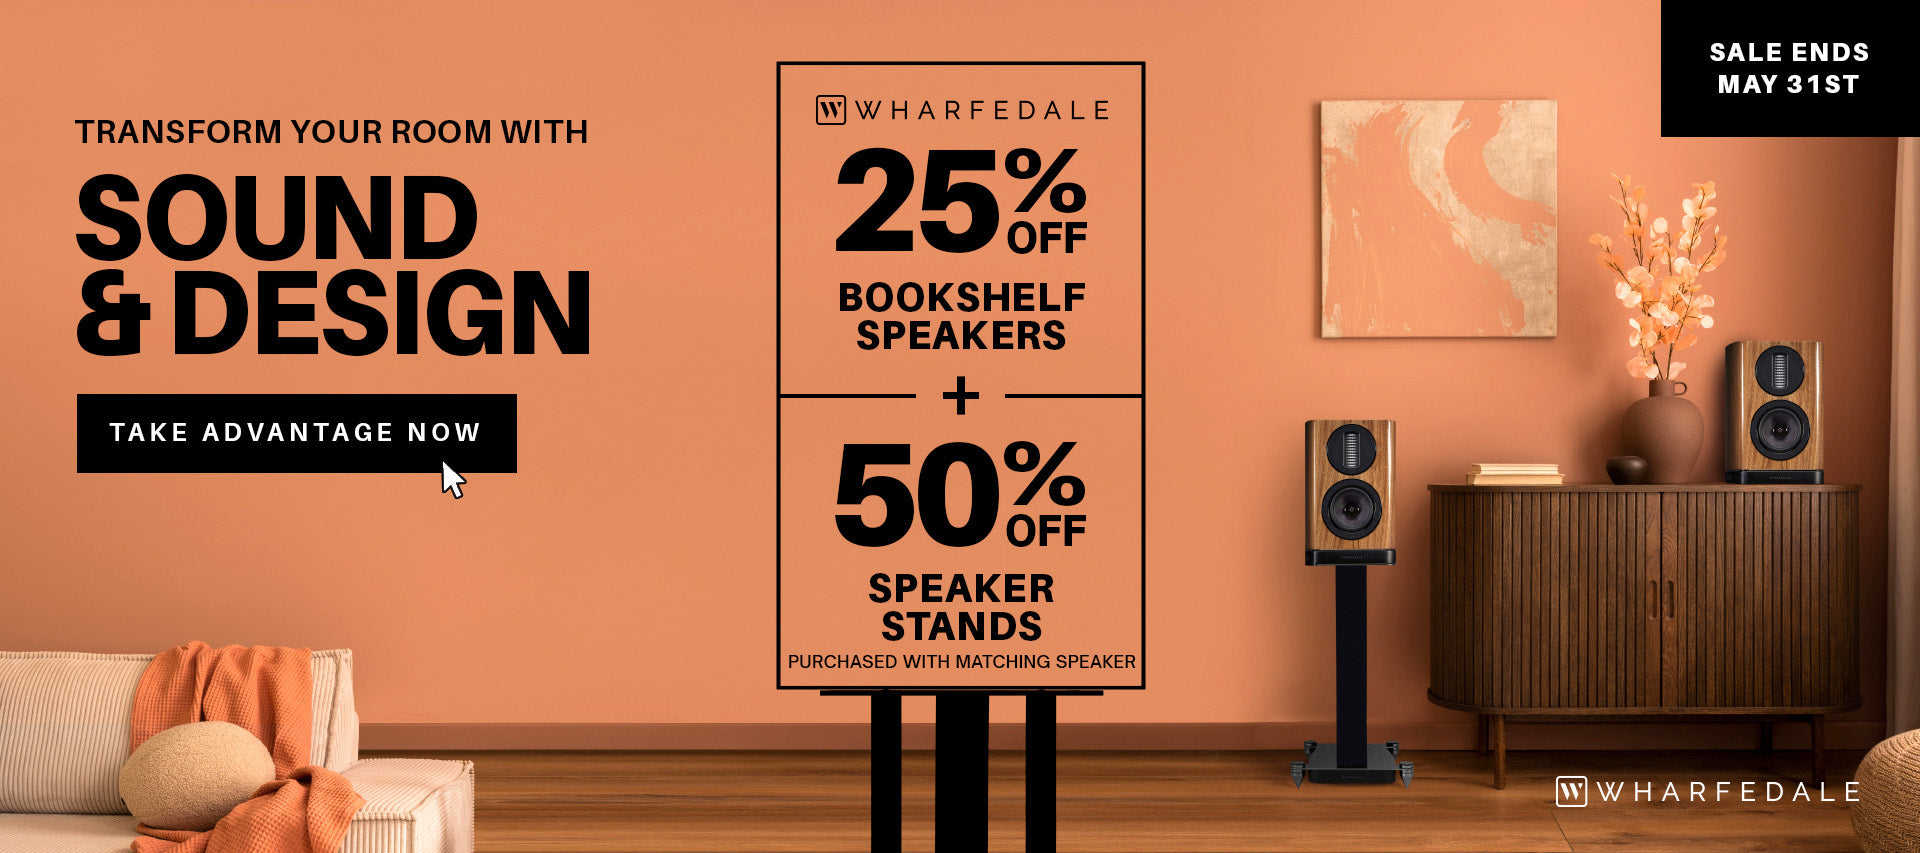 25% Off Wharfedale Speakers + 50% Off Speaker Stands